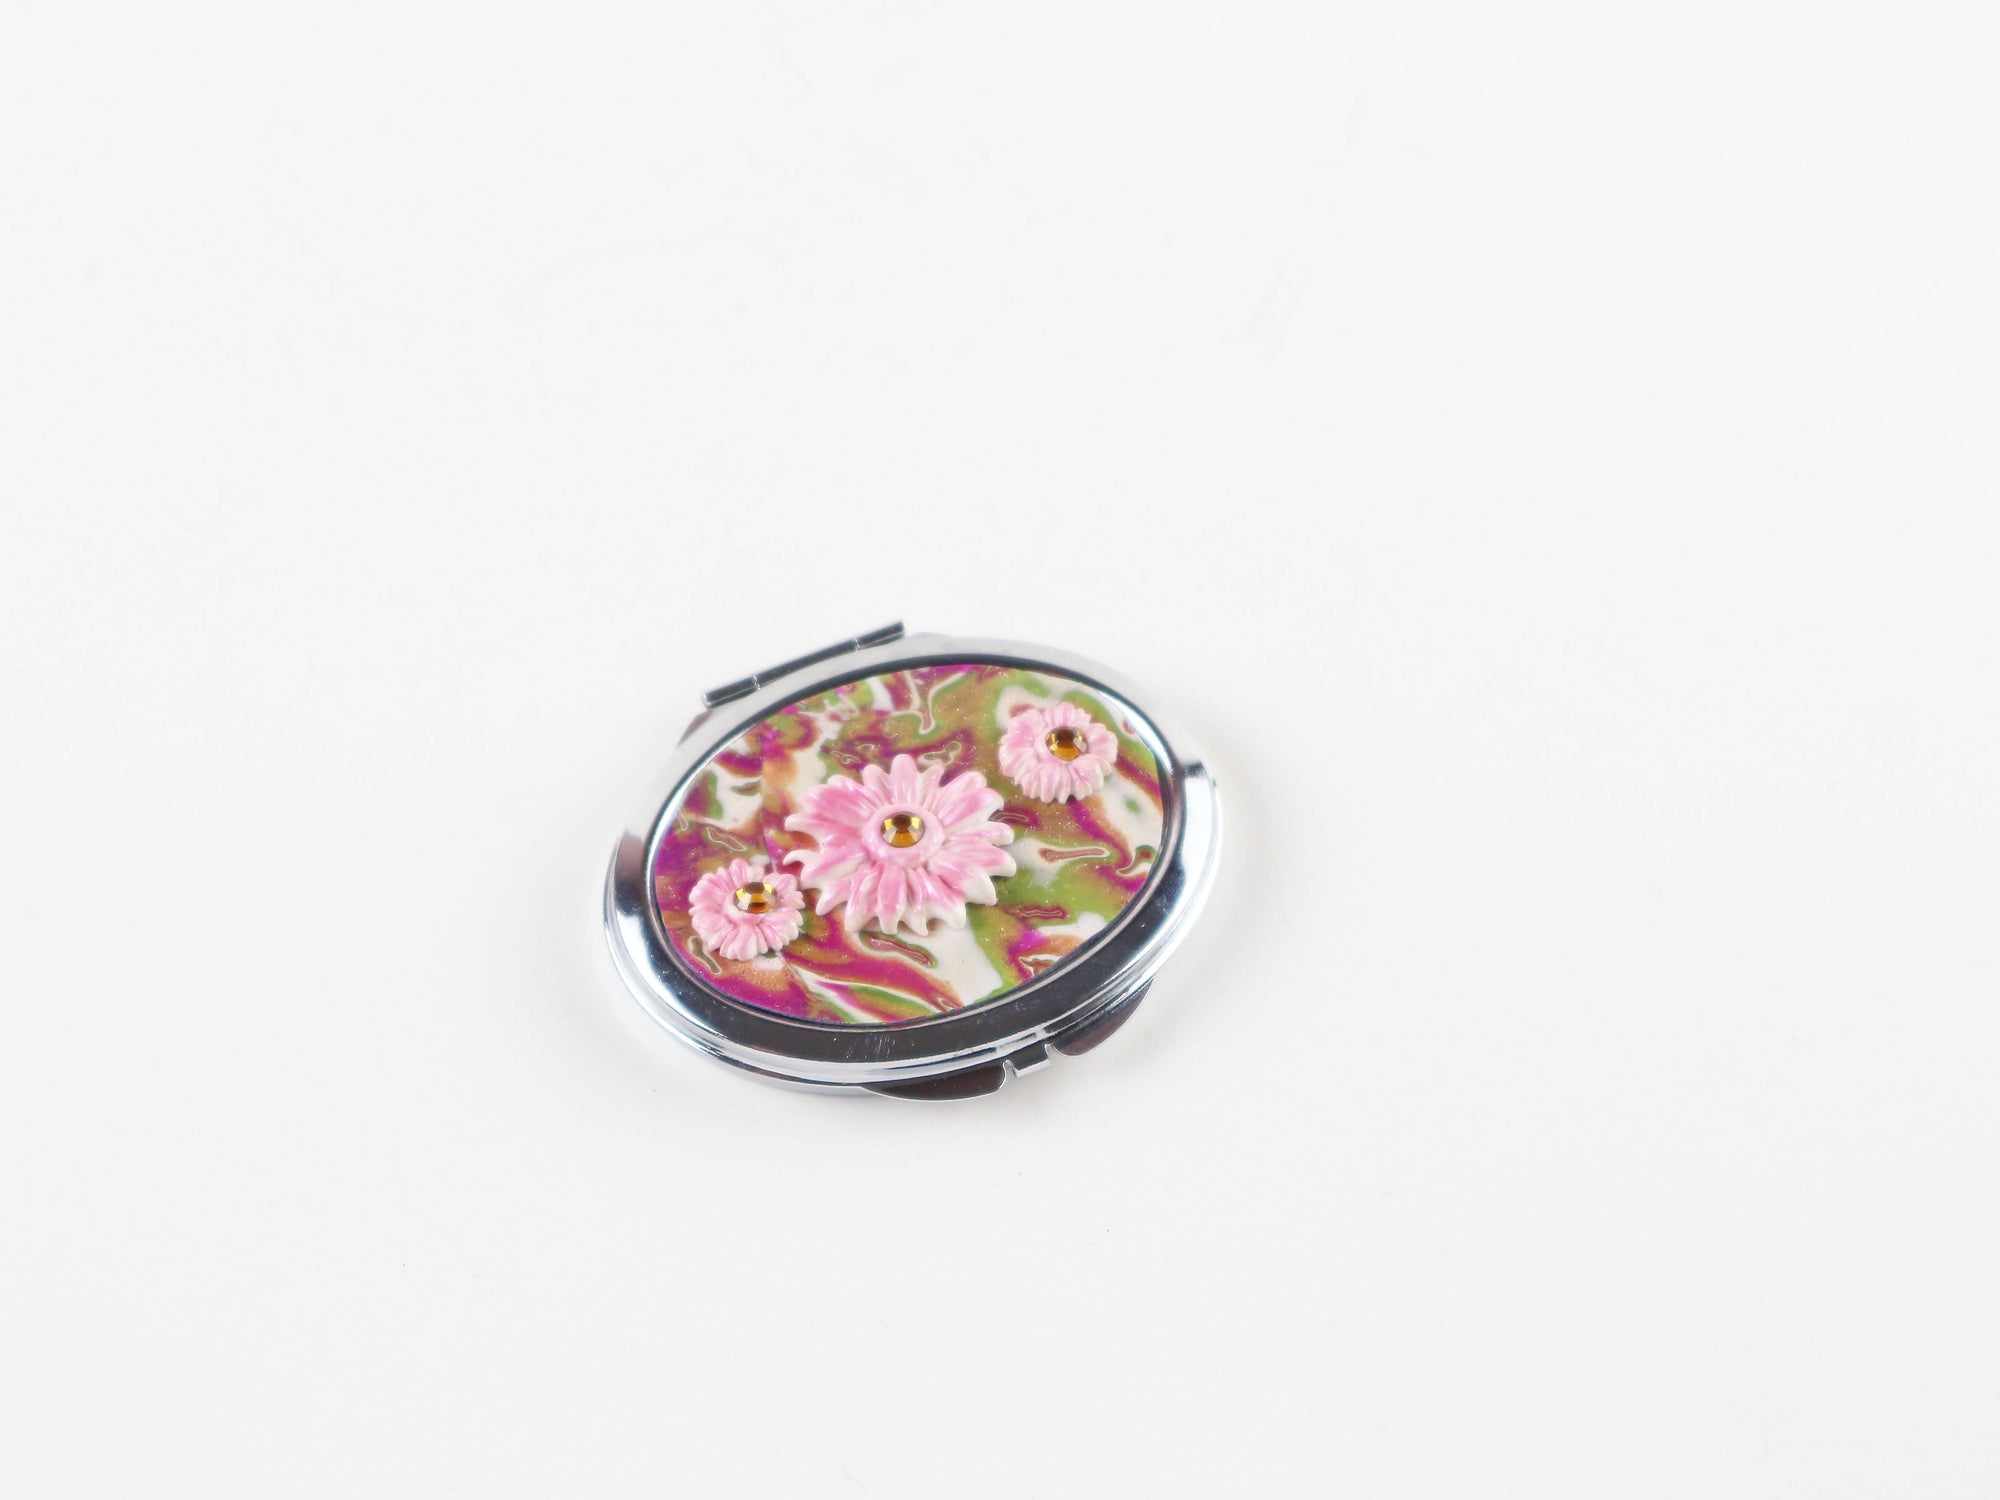 Free Shipping- Compact Mirror- Oval Pink & Green Stylized Flower w/ gems Design